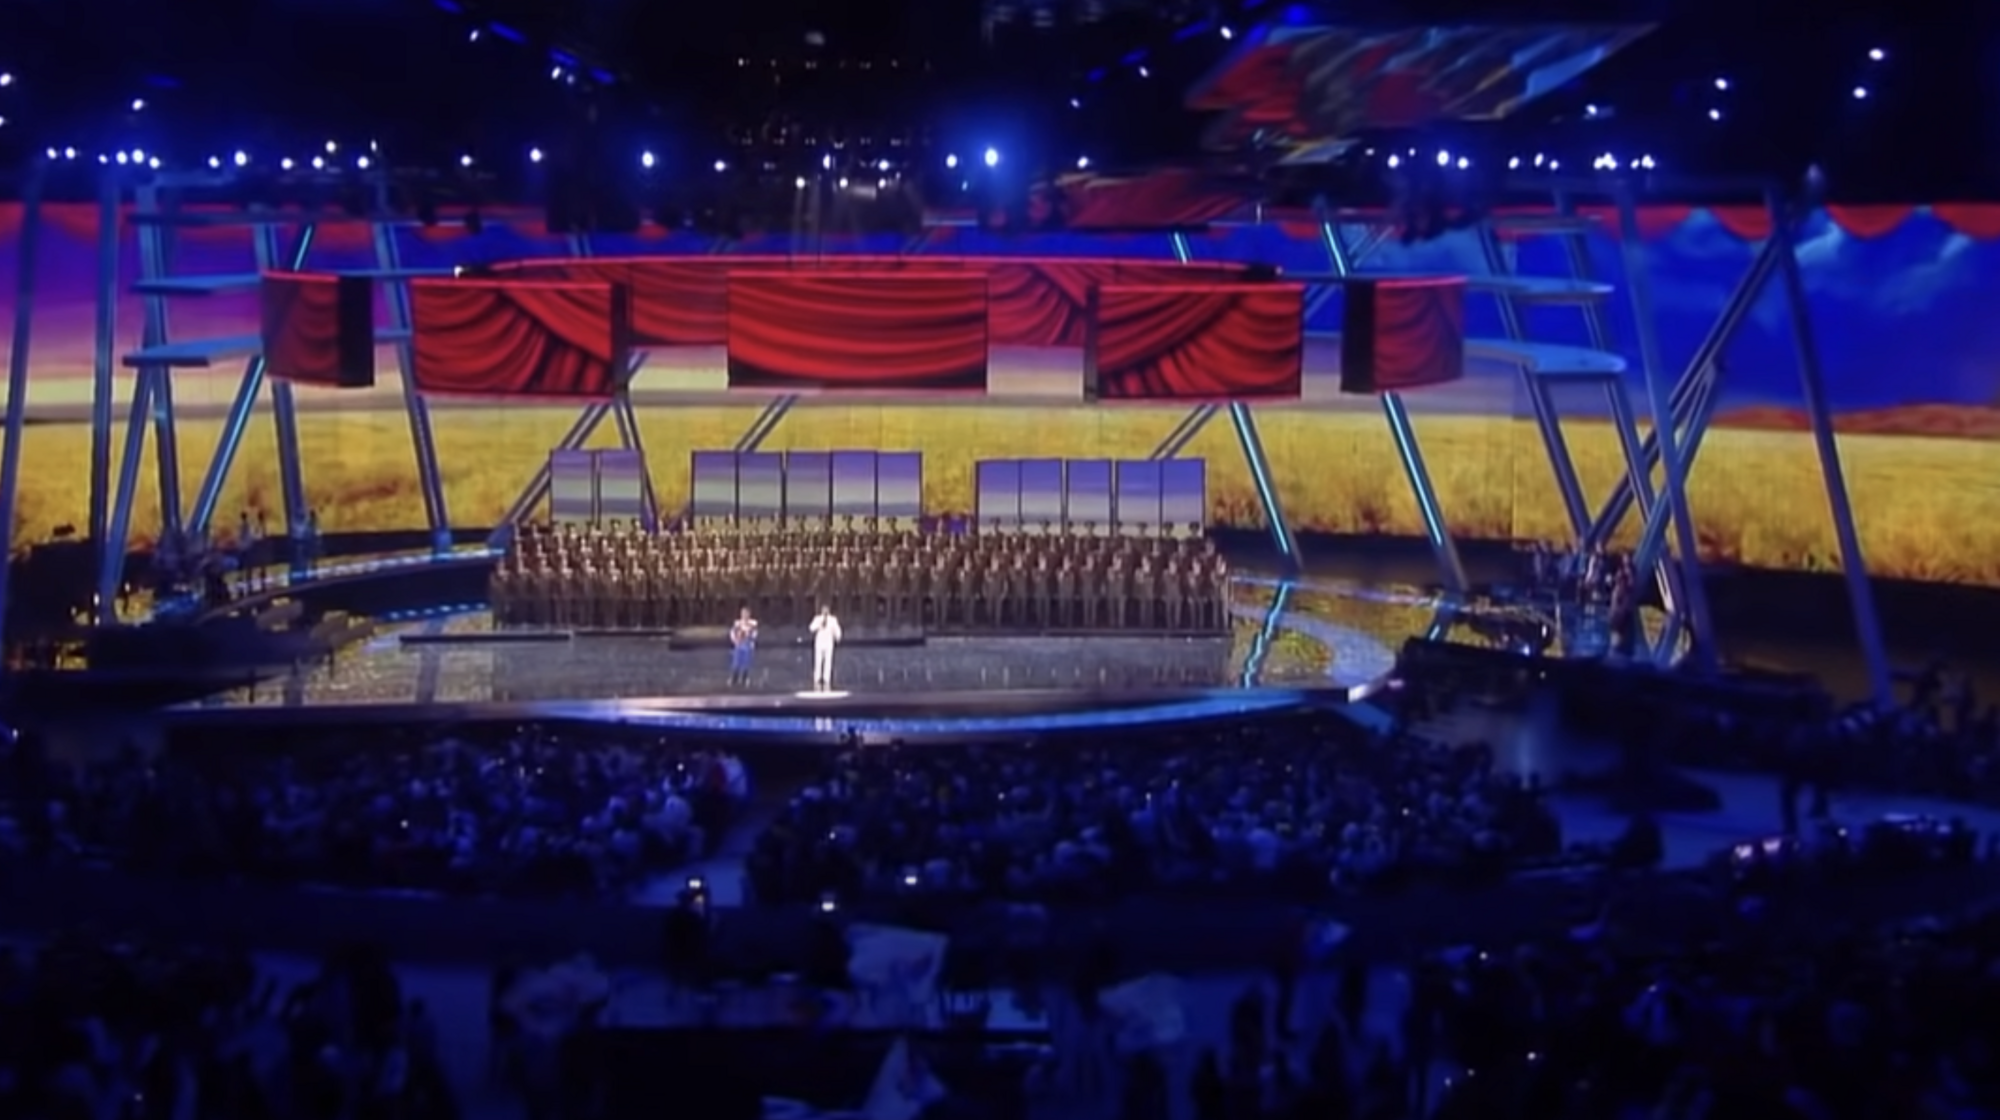 With a tank on stage and a military choir: how Russia hinted at war in Ukraine while hosting Eurovision in 2009